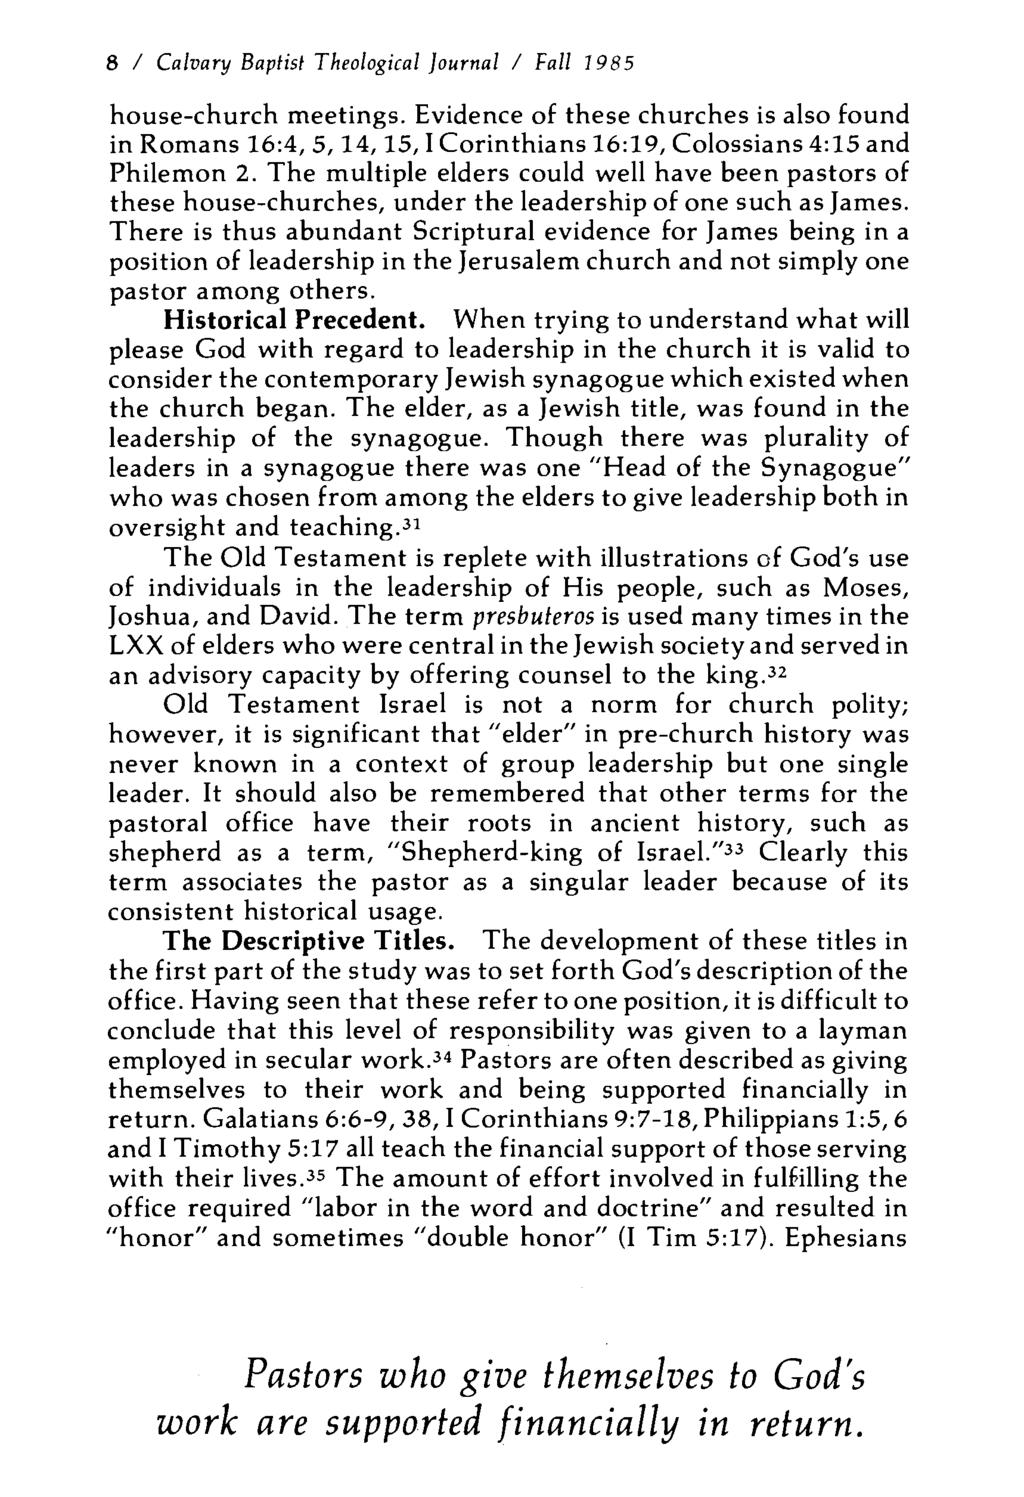 8 I Calvary Baptist Theological Journal I Fall 1985 house-church meetings. Evidence of these churches is also found in Romans 16:4, 5, 14, 15, I Corinthians 16:19, Colossians 4:15 and Philemon 2.